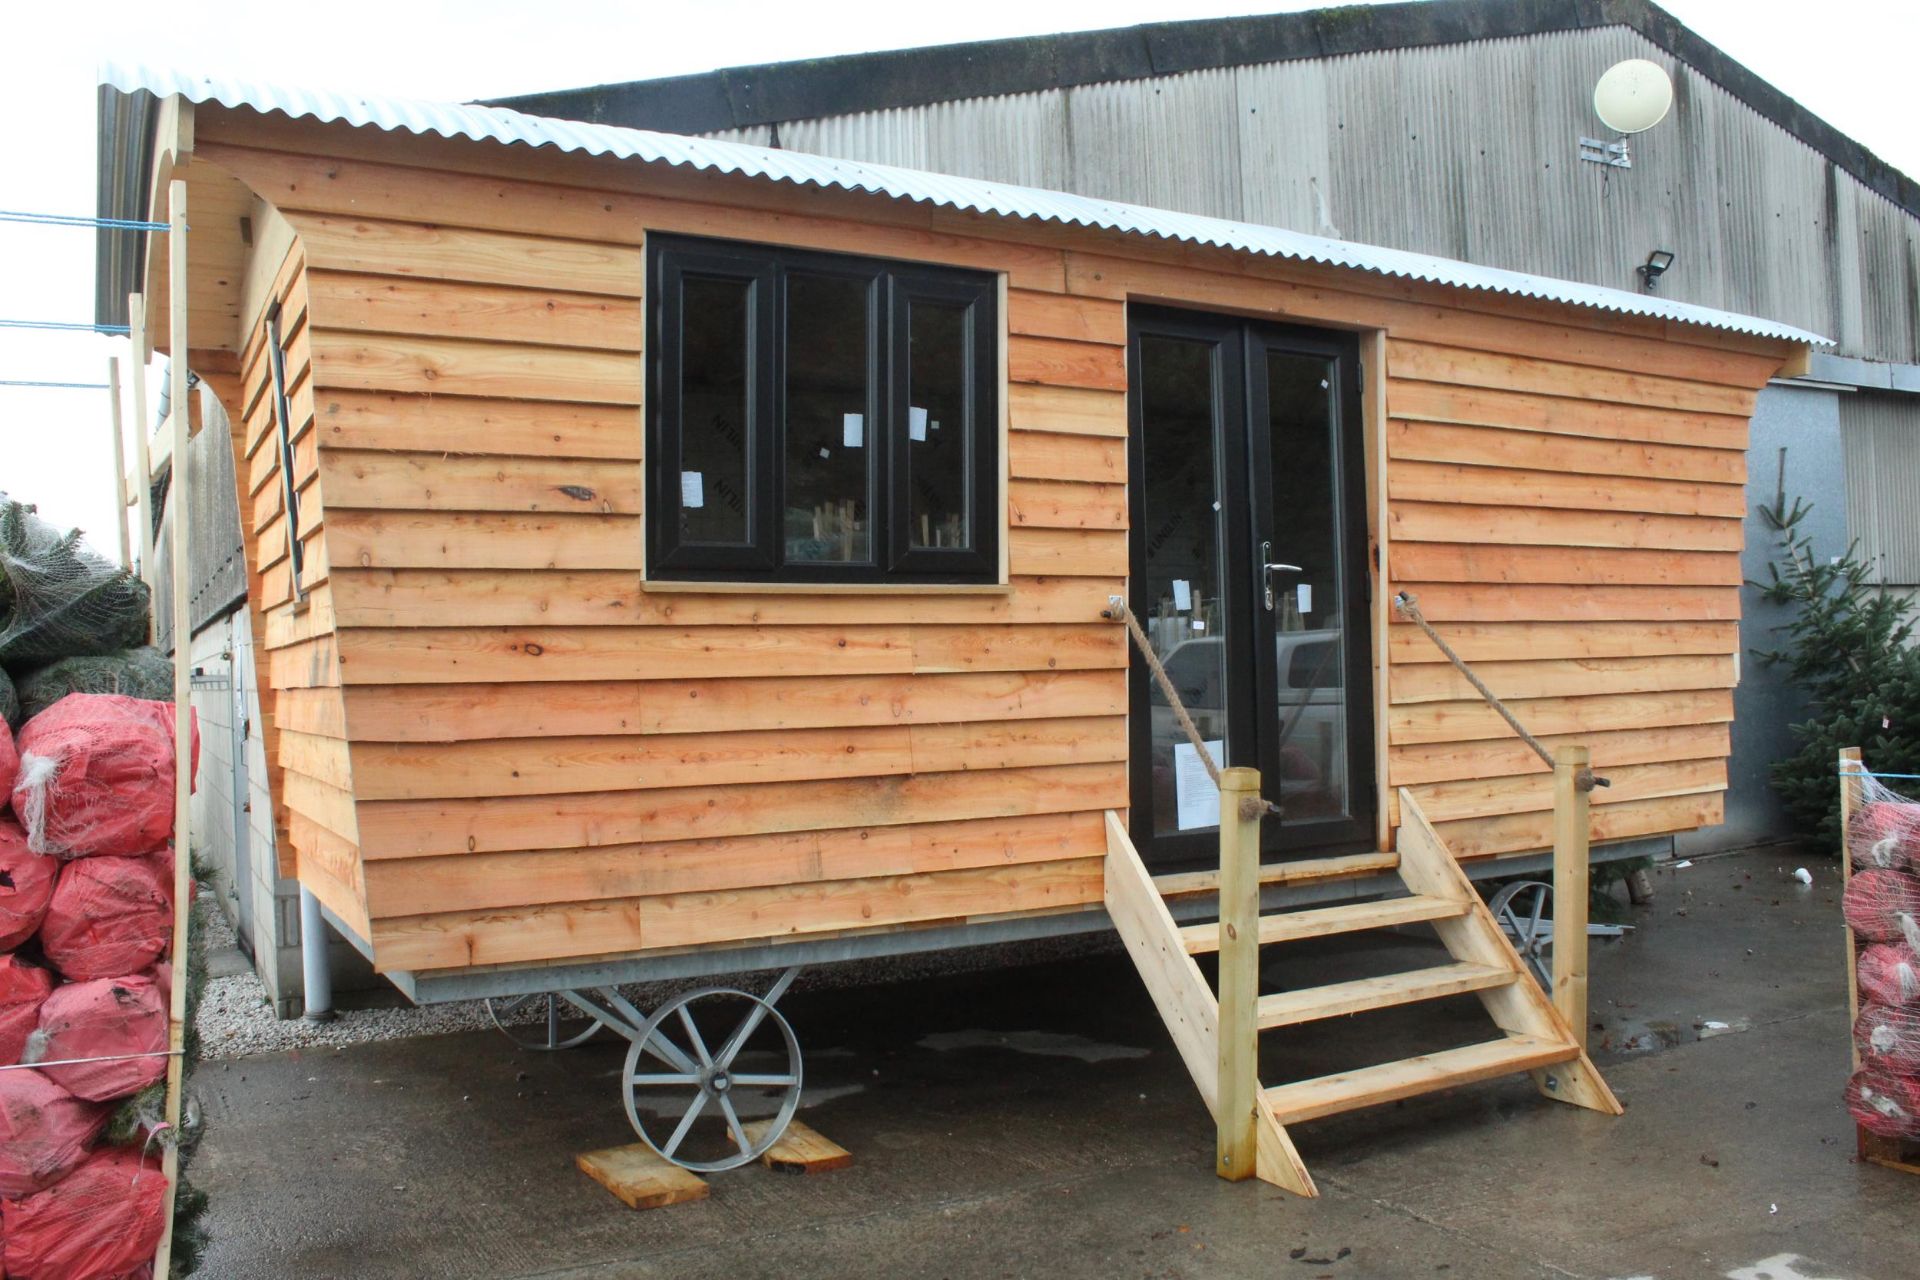 BRAND NEW EXTRA STRONG SHEPHERD HUT "PROVEN DESIGN" 23'6" X 9'6" AT EAVES. 75MM KINGSPAN IN THE - Image 7 of 9